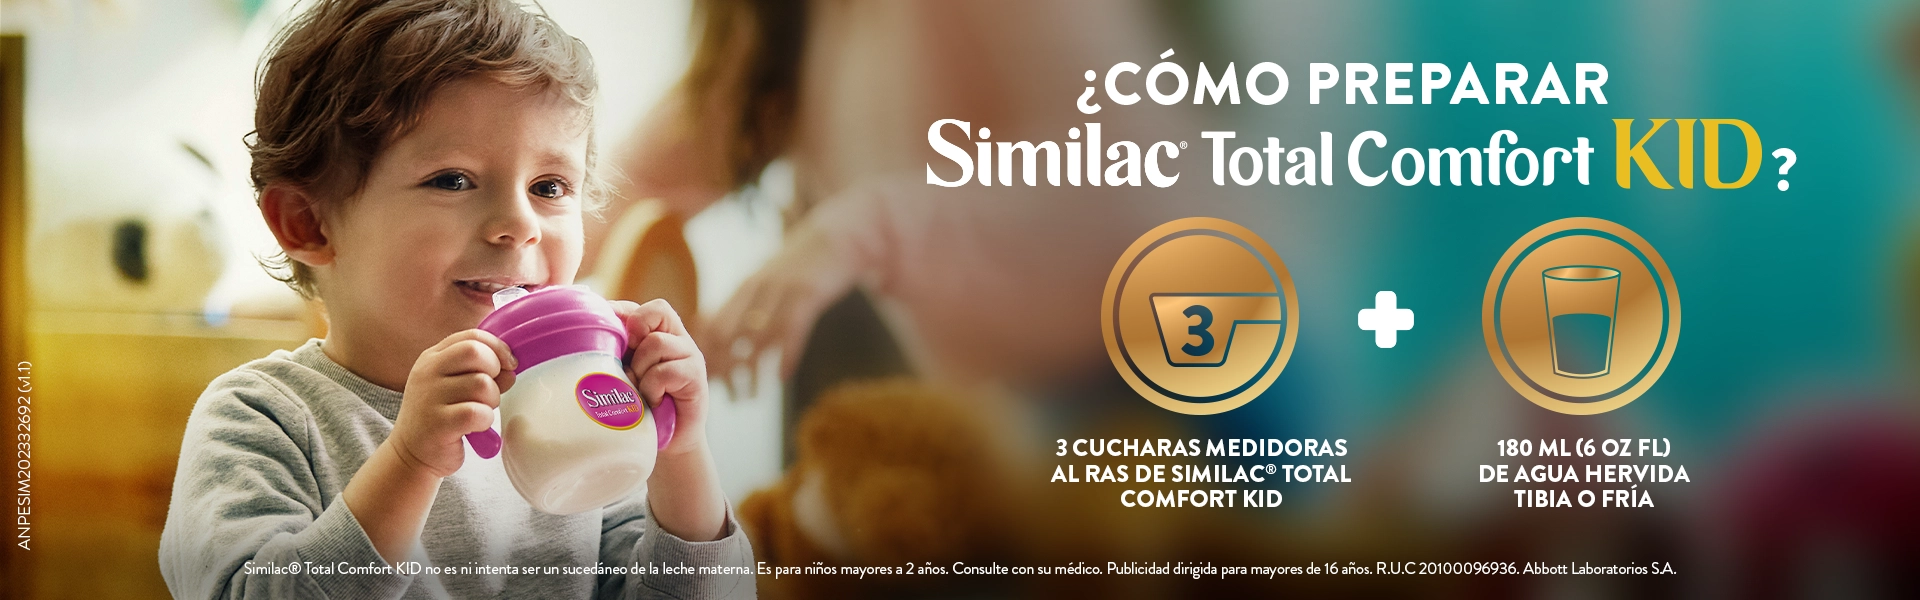 banner-similac-comfortkid